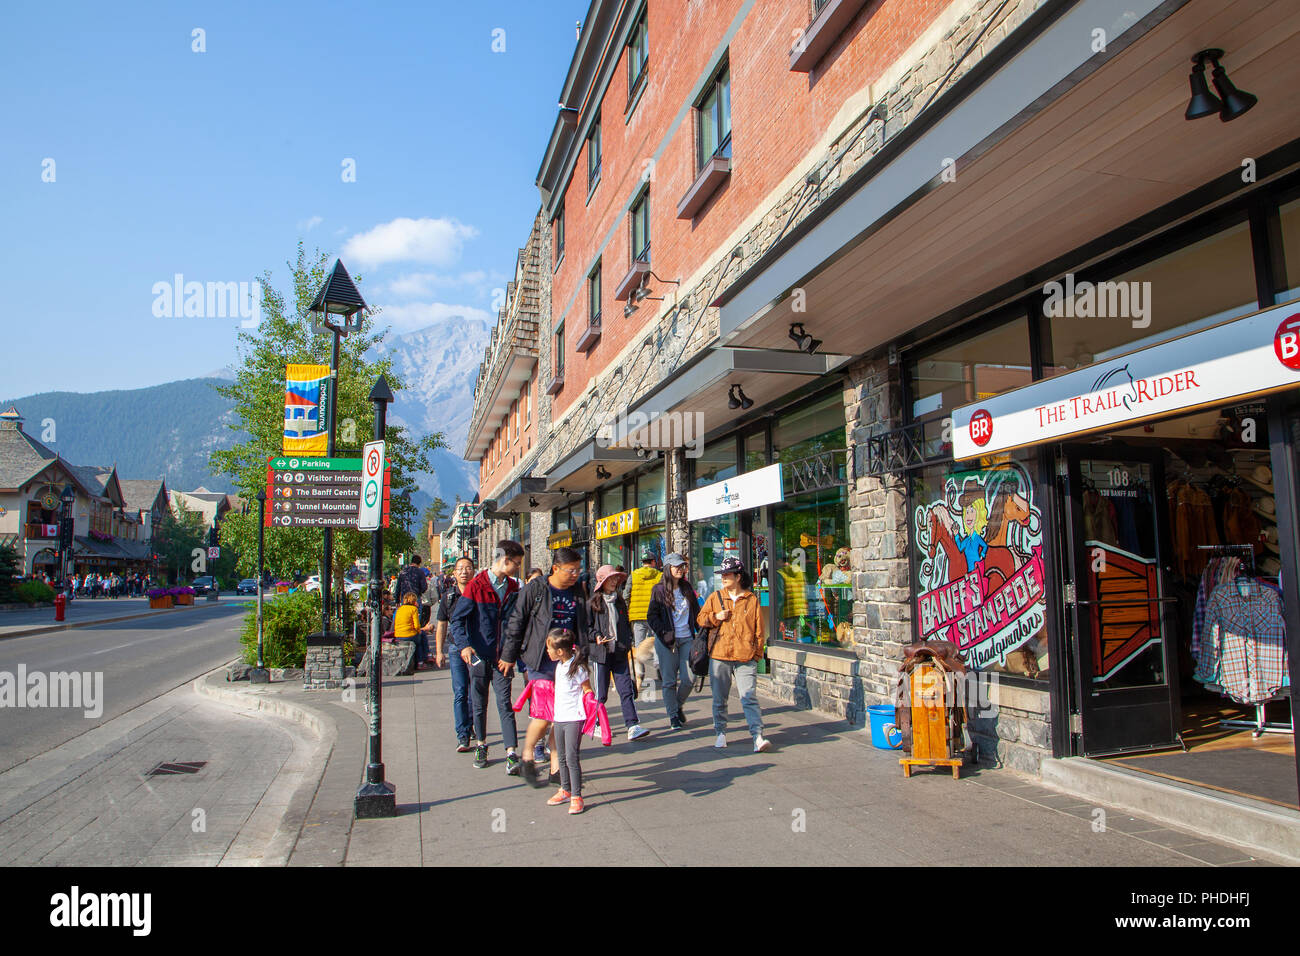 BANFF, CANADA - AUG 20, 2018: Visitors walking on Banff Avenue inside Banff National Park in Alberta, Canada. The famous town is renowned for its prox Stock Photo